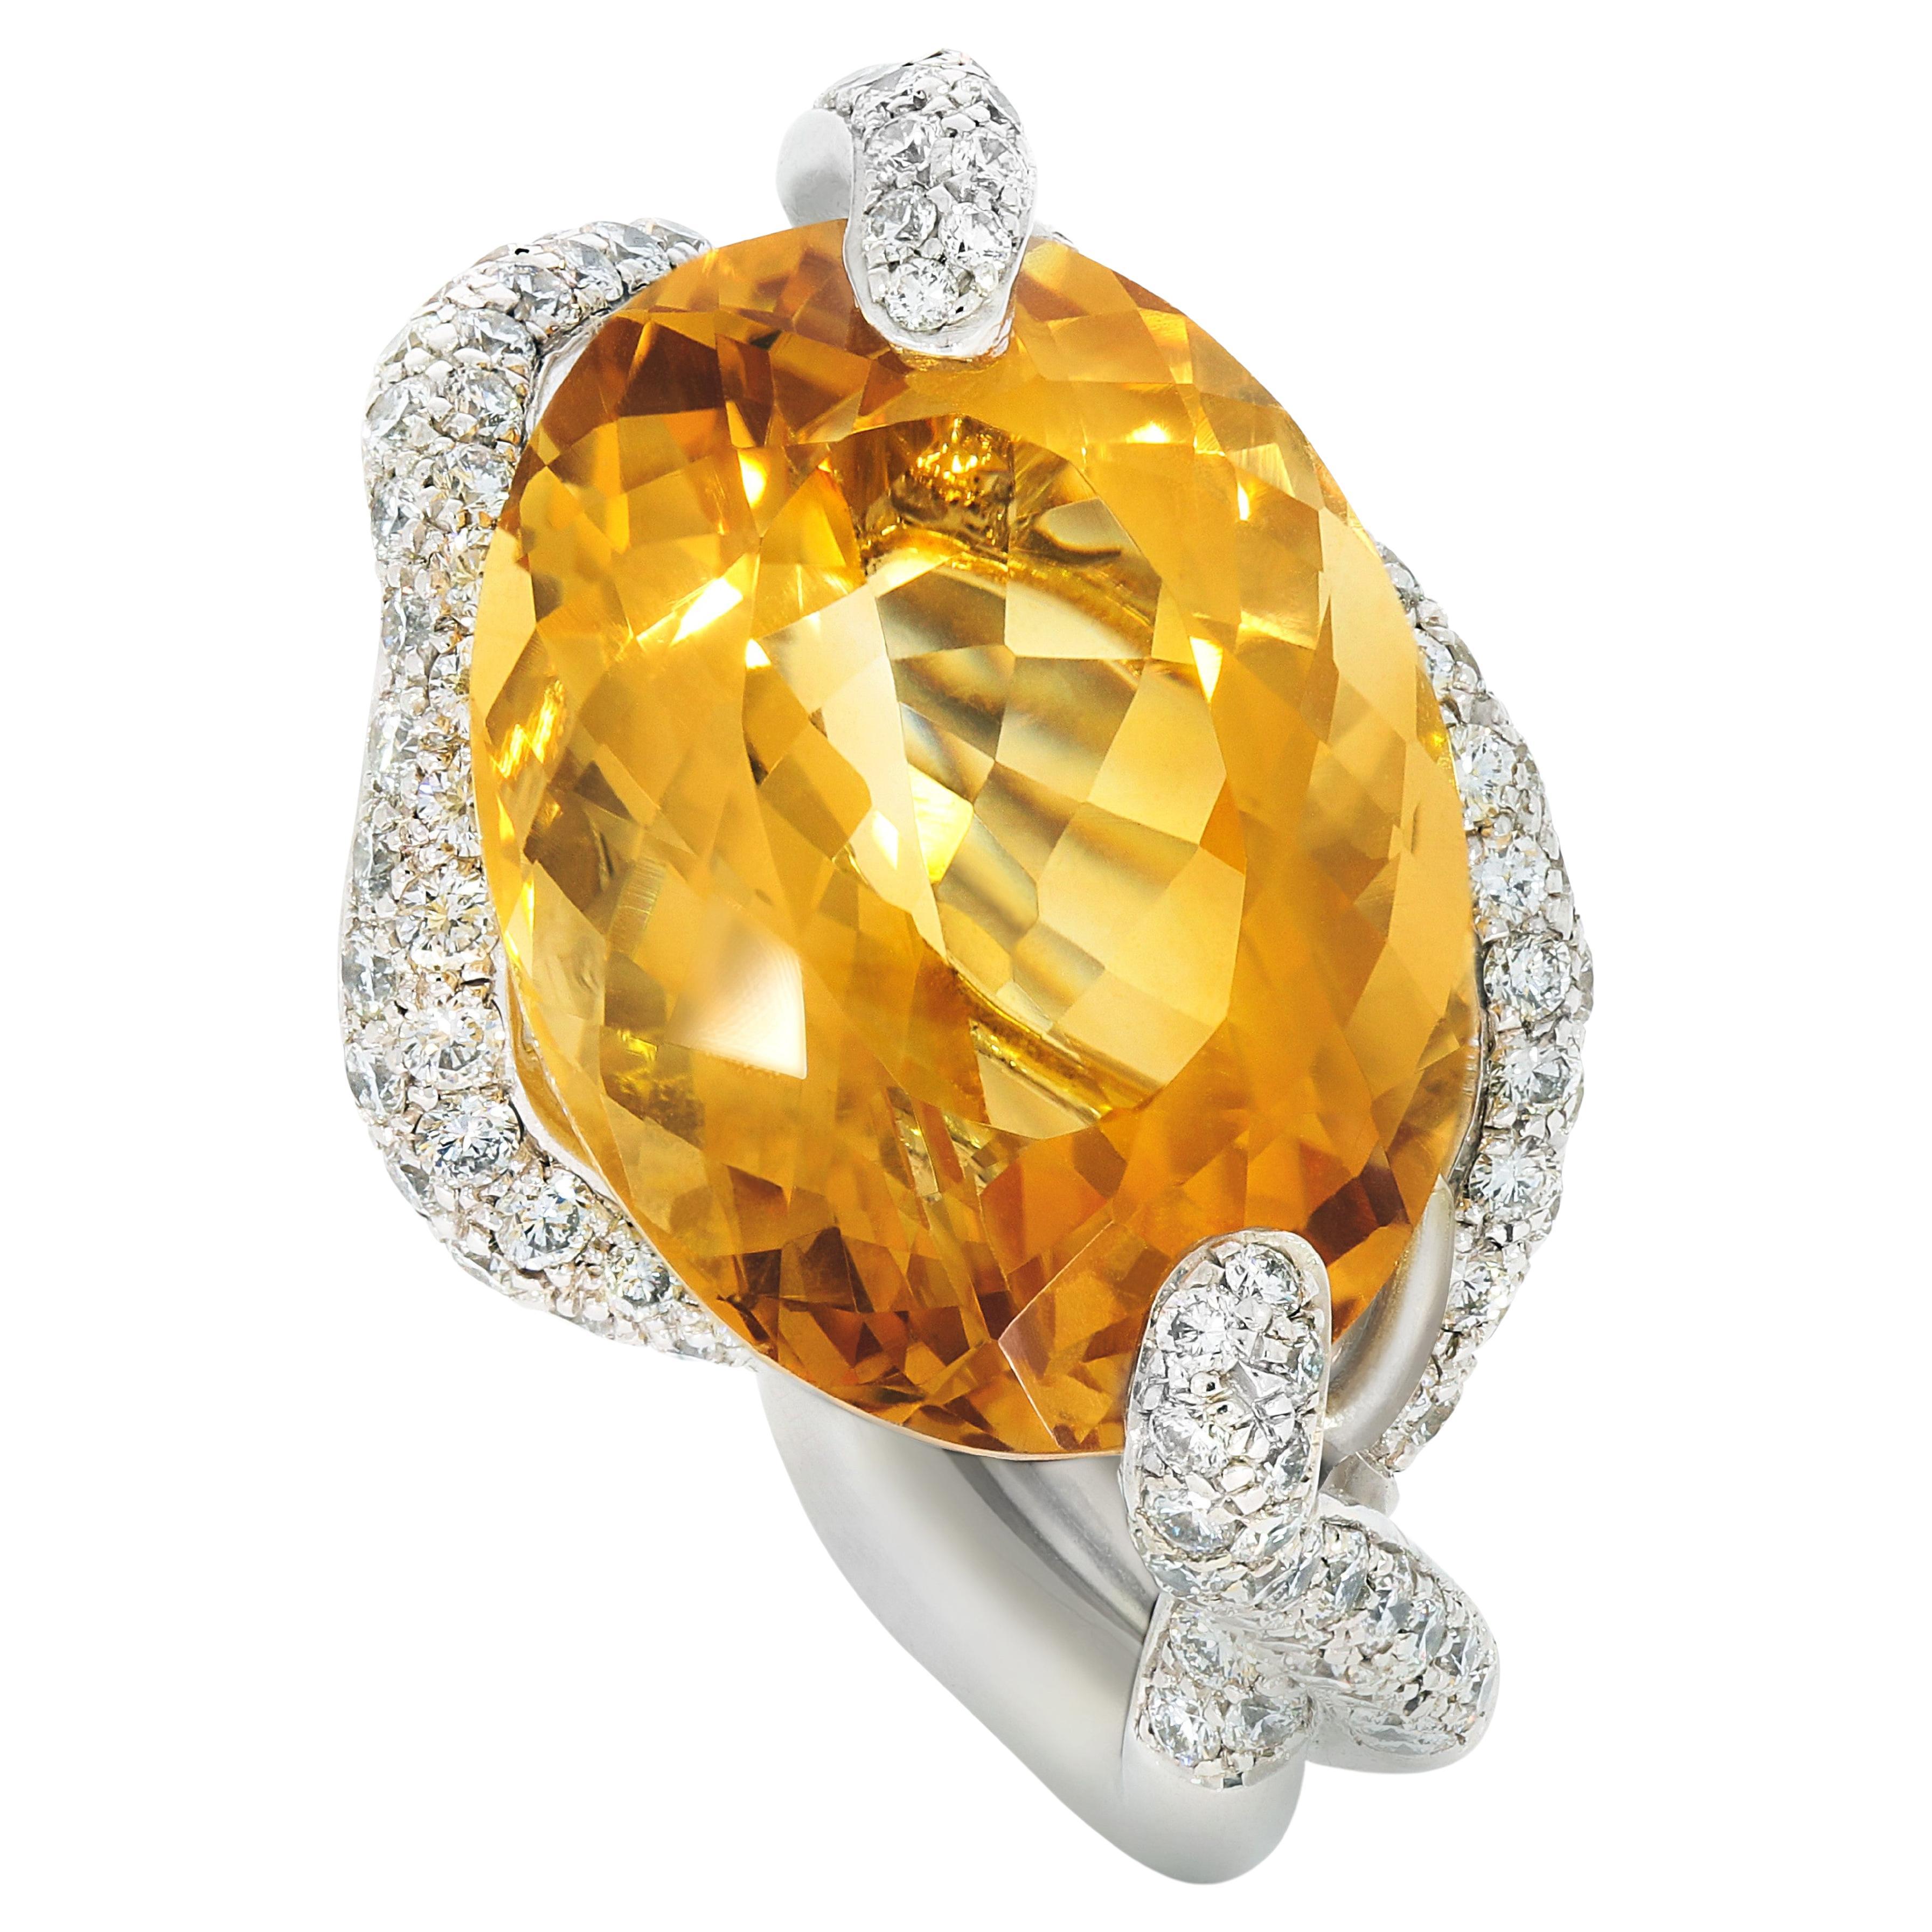 Rosior one-off Yellow Topaz and Diamond Cocktail Ring set in White Gold